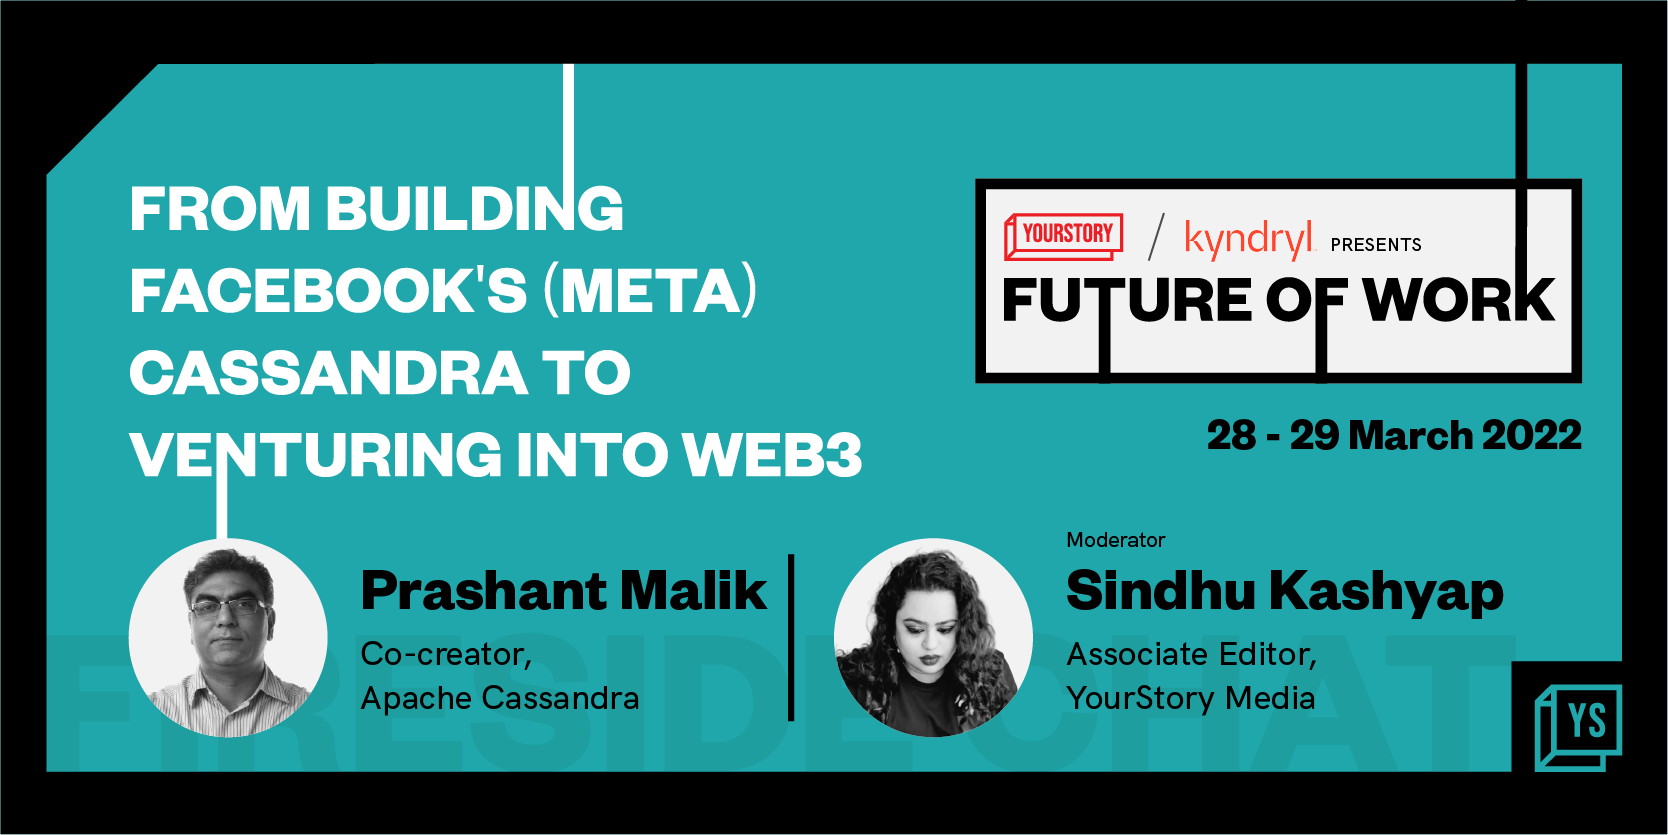 From building core systems of Meta, Instagram, Netflix to helping power Web 3.0, the journey of Prashant Malik 
